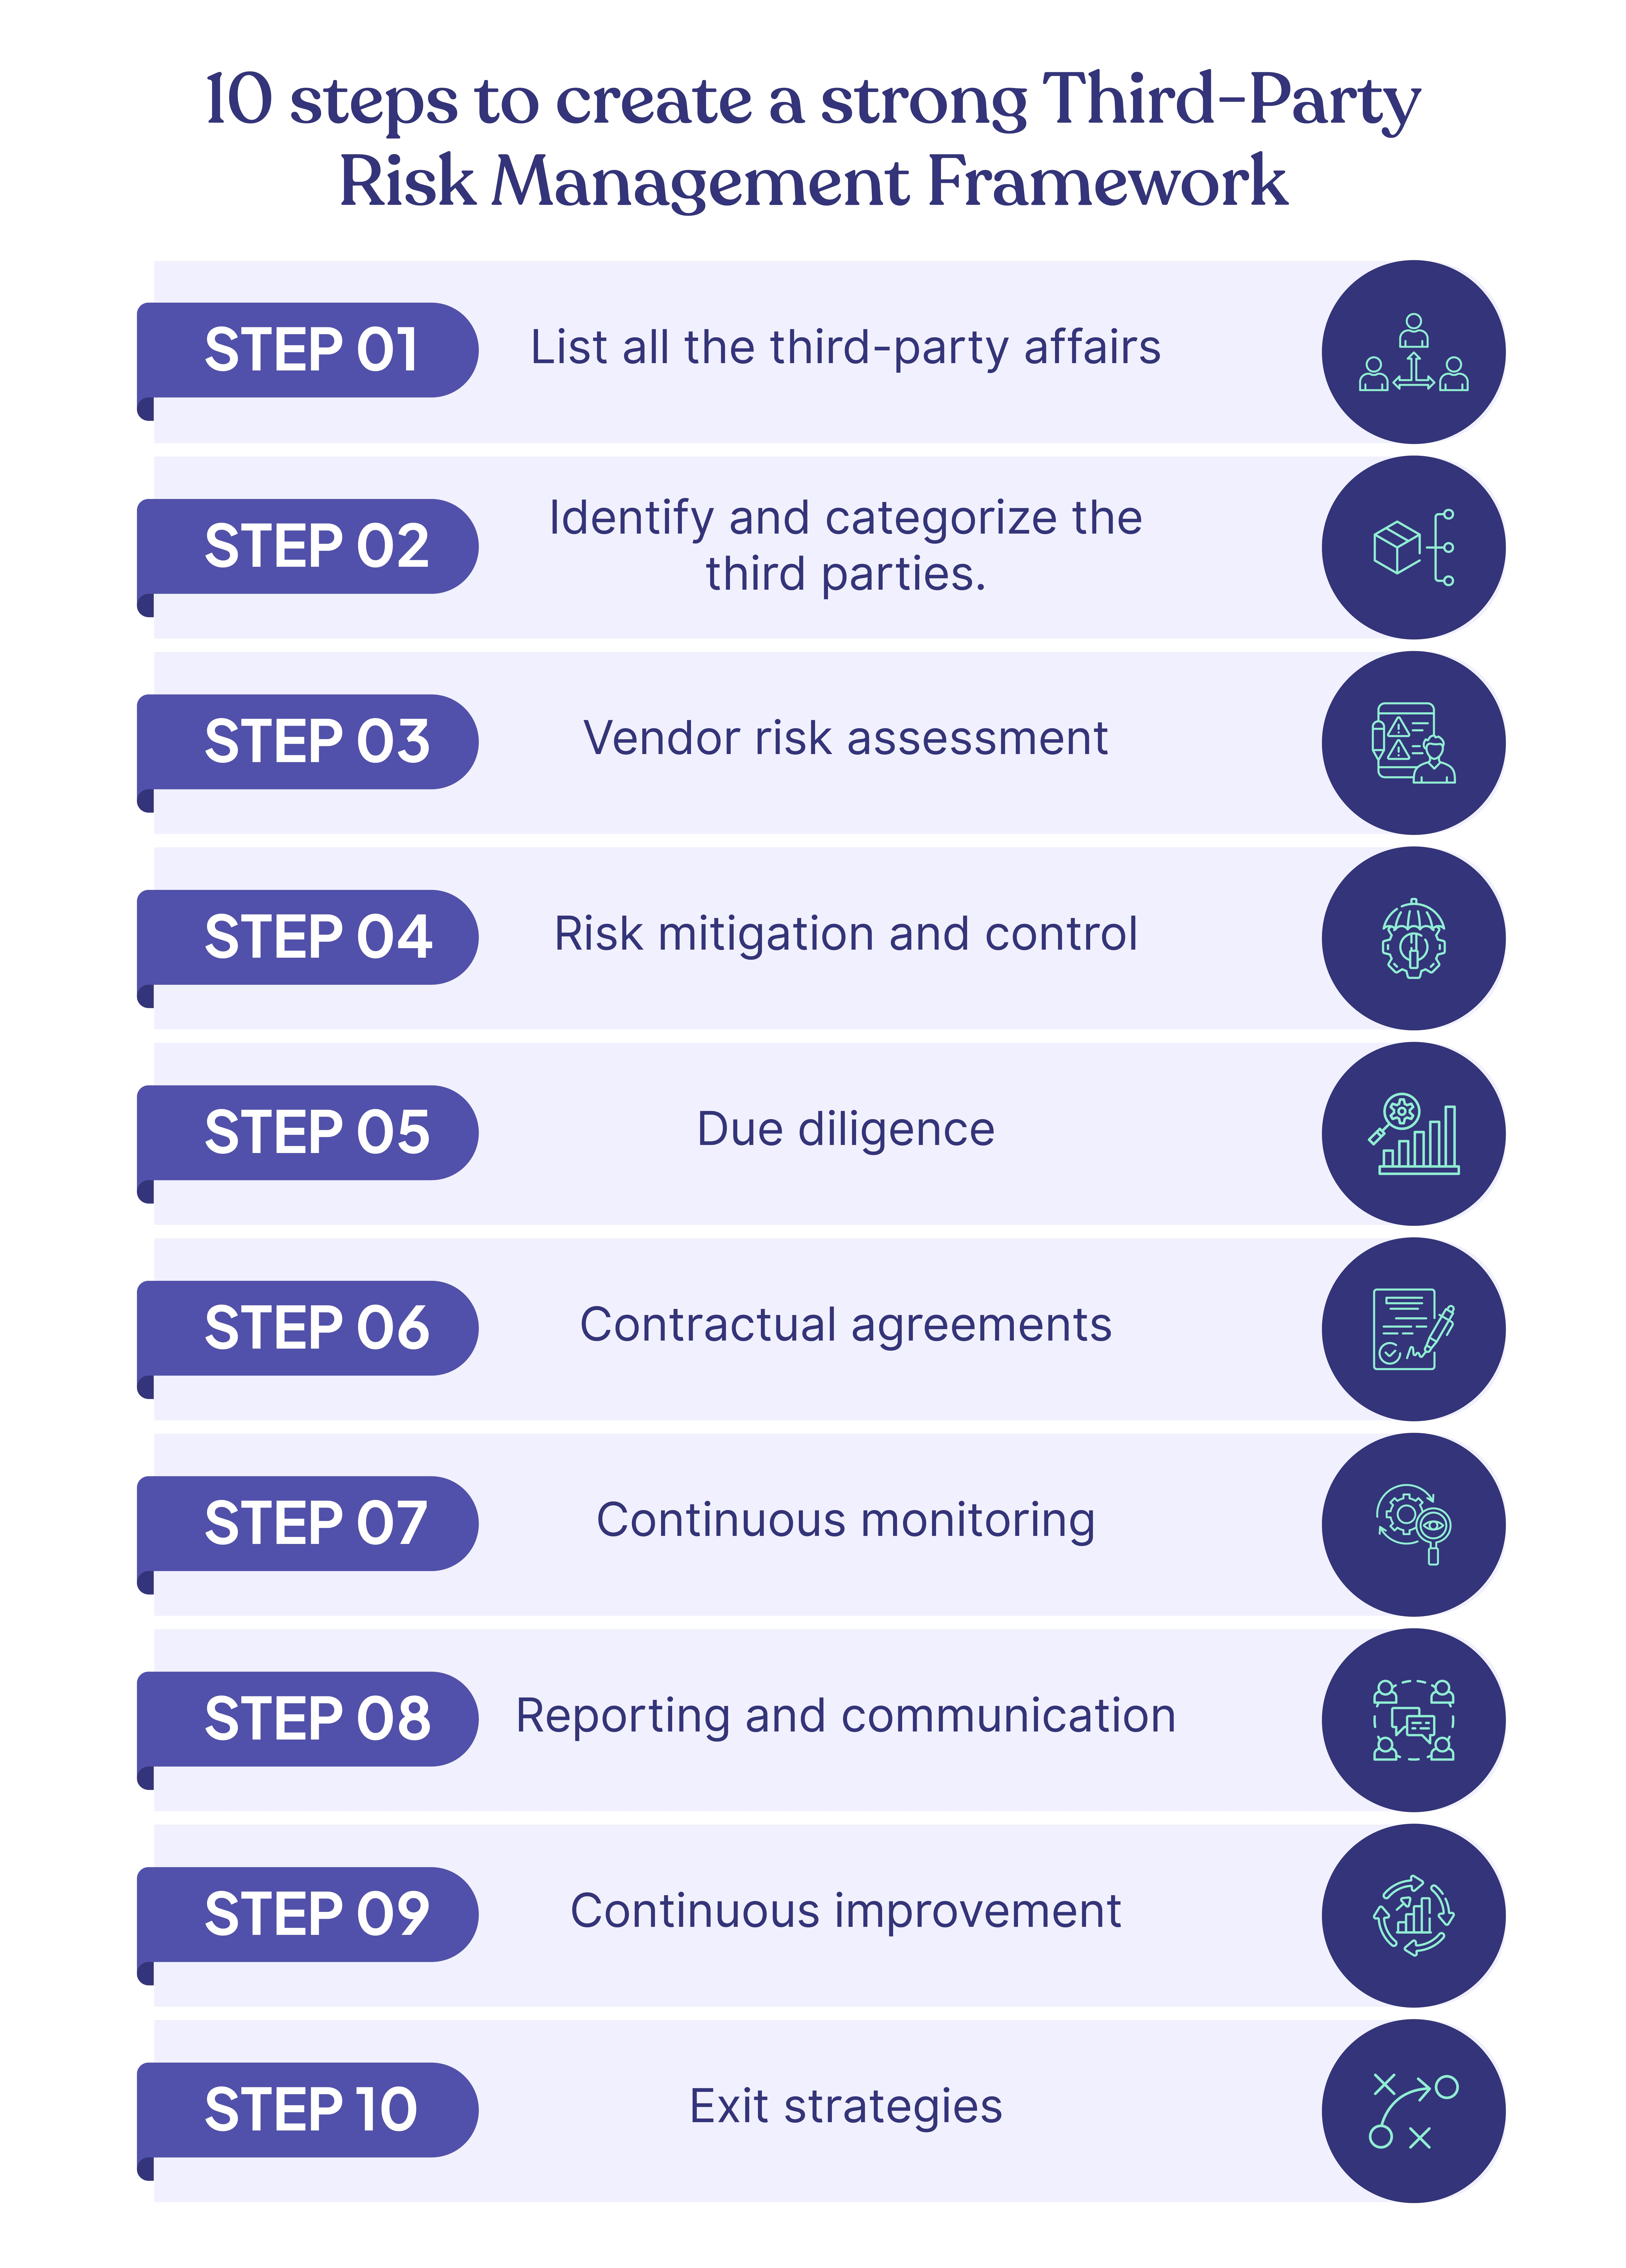 10 steps to create a strong Third-Party Risk Management Framework